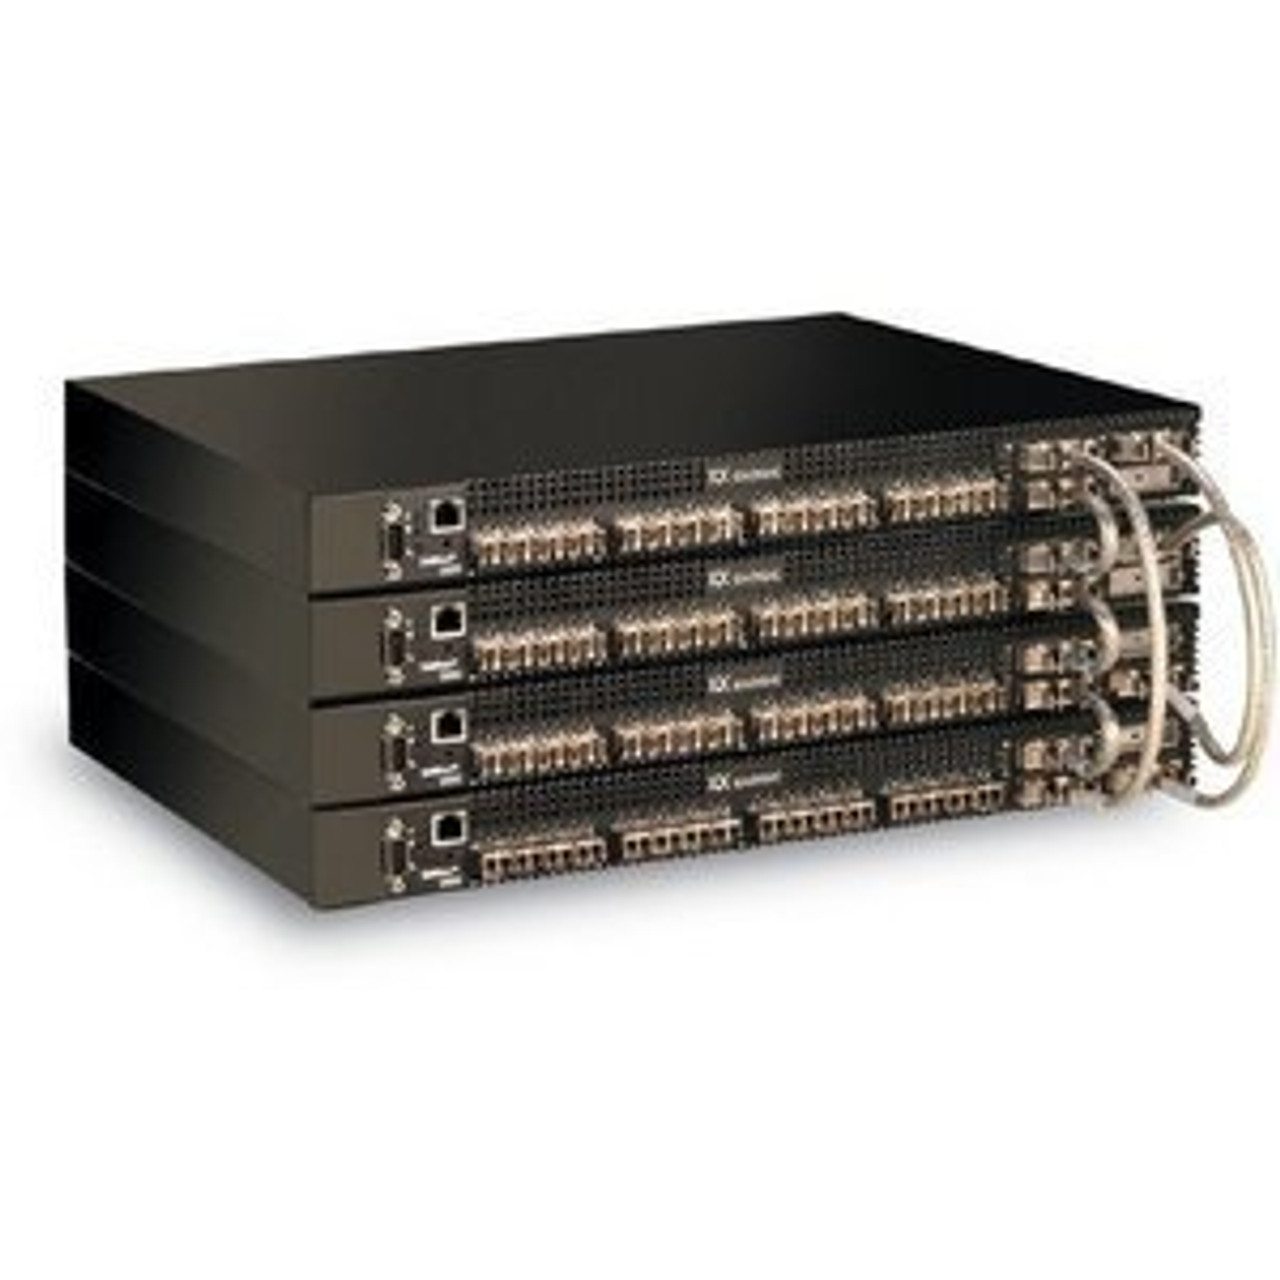 SB5600Q-20A QLogic SANbox 5600Q Stackable Ethernet Switch With 16x4GB and 4x10GB Ports SFP Enabled with 1 Power Supply (Refurbished) SB5600Q-20A